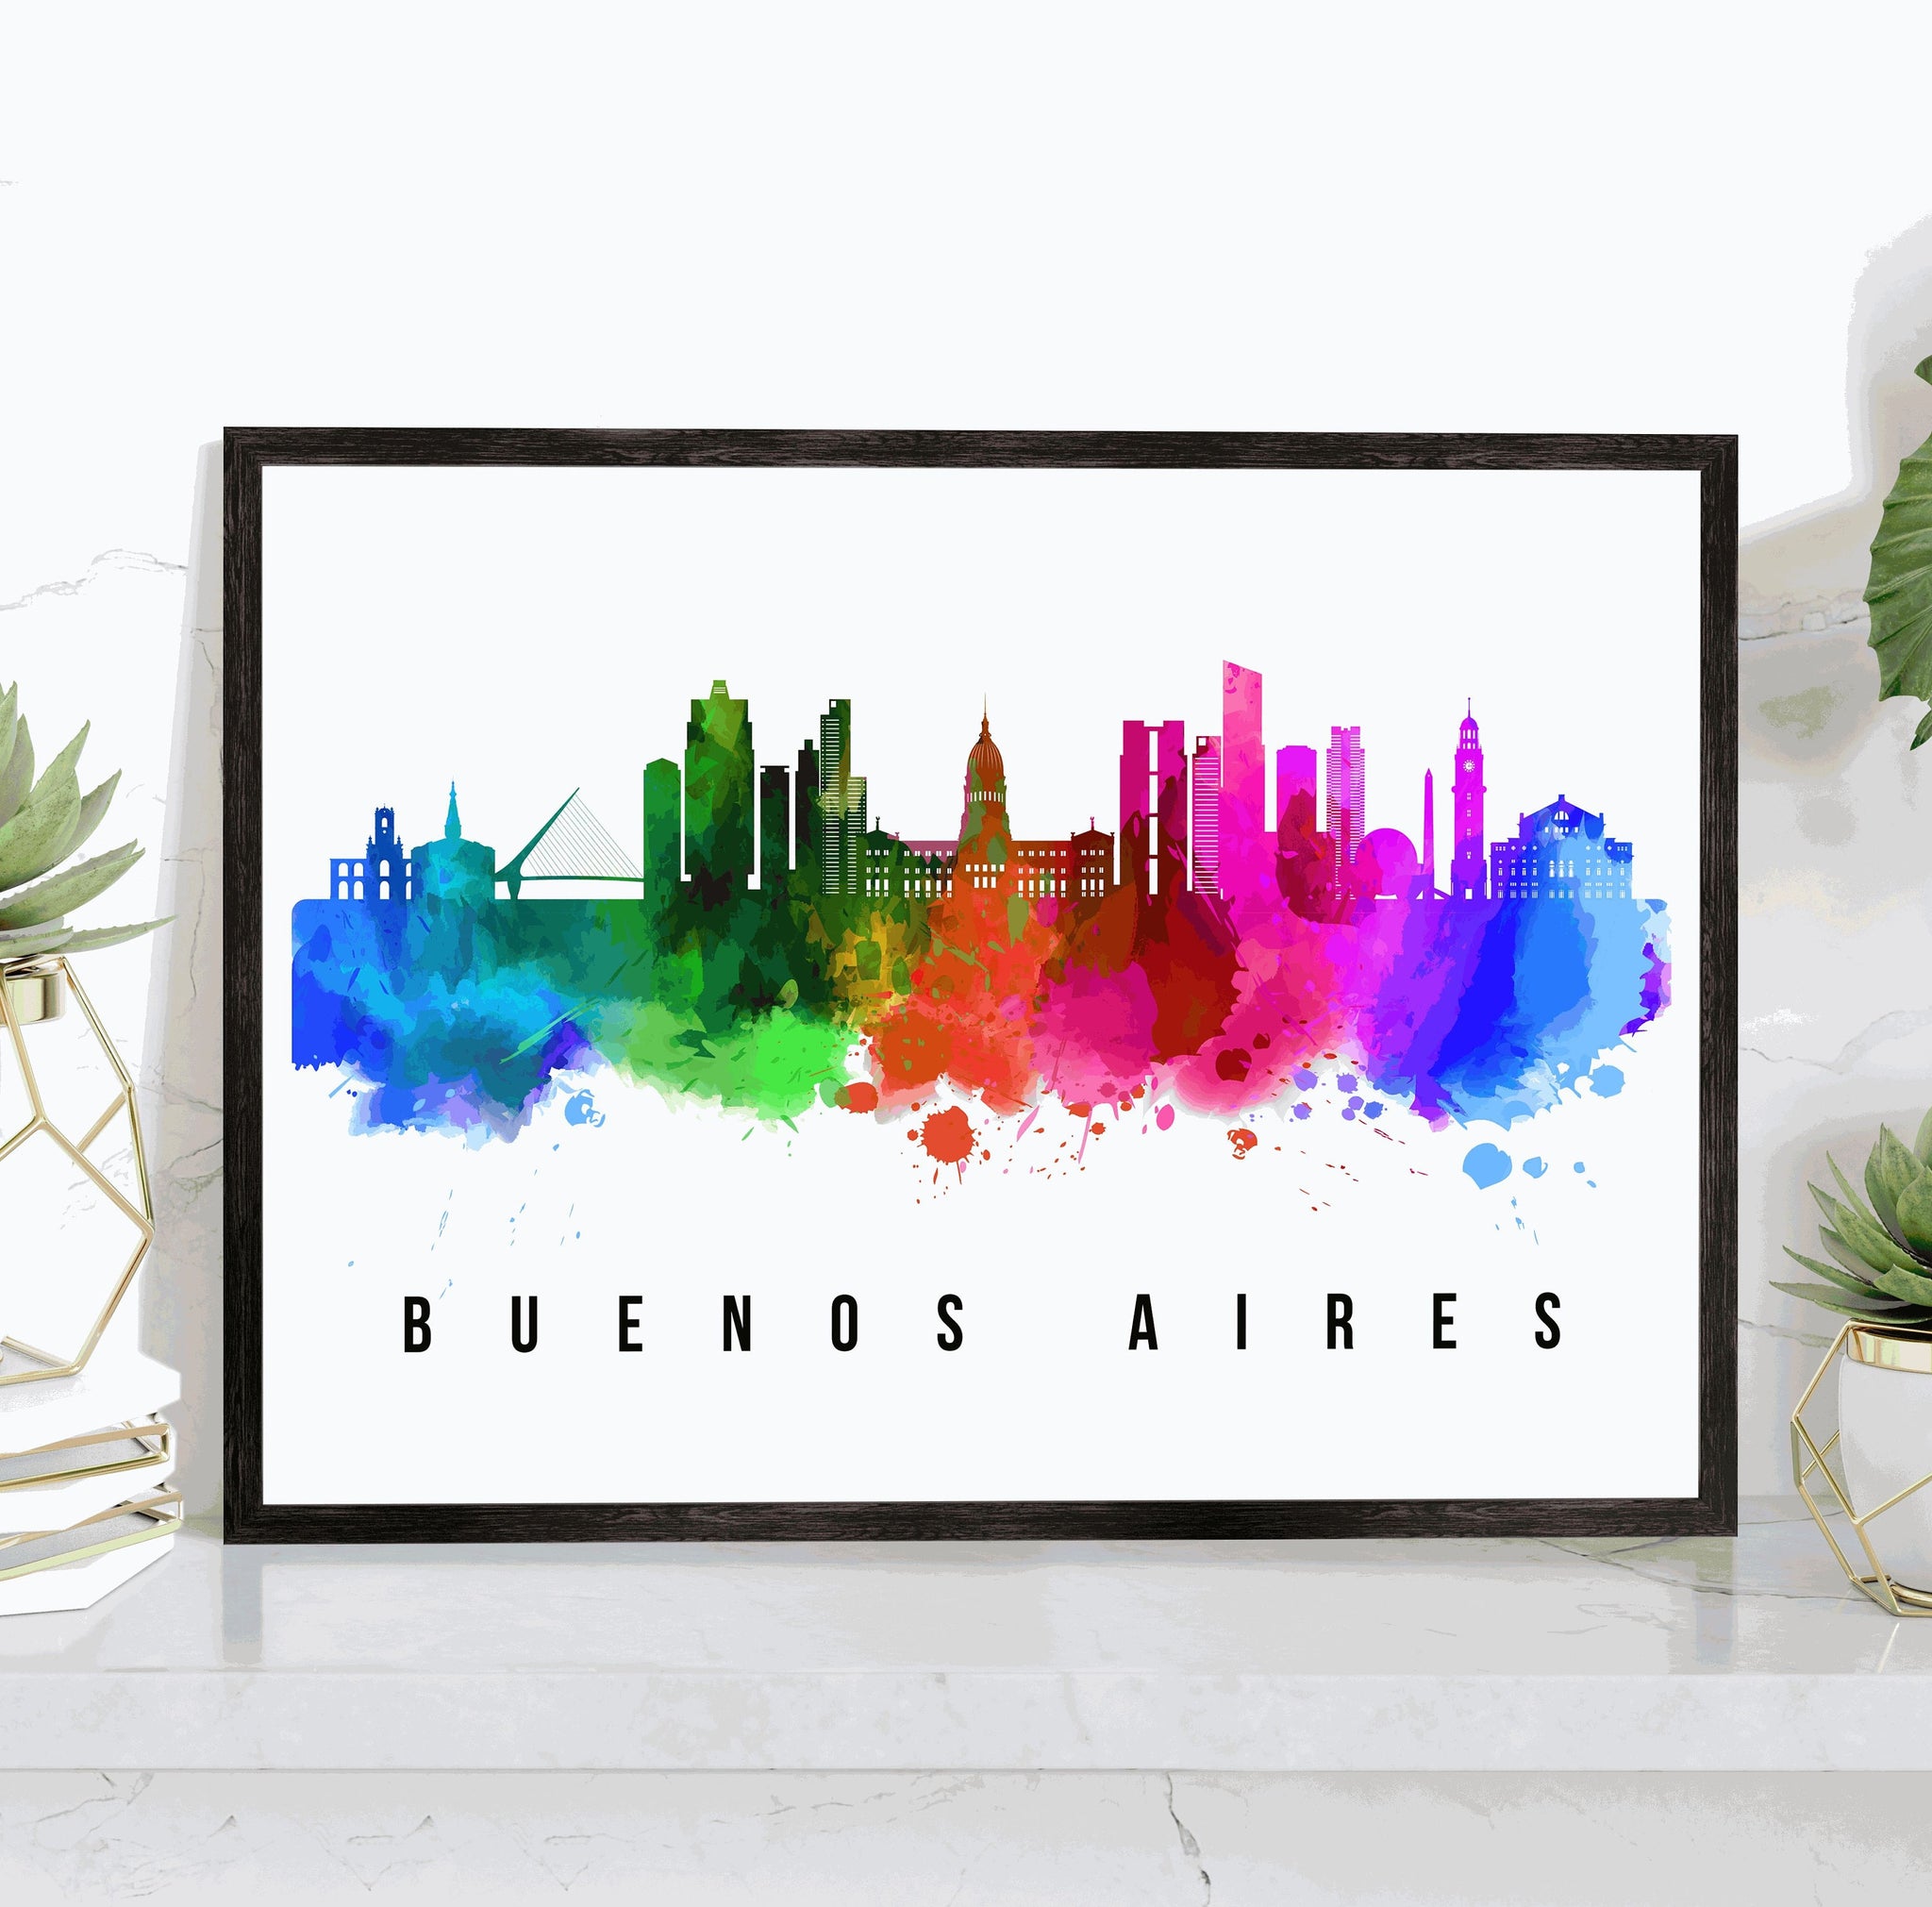 BUENOS AIRES - ARGENTINA Poster, Skyline Poster Cityscape and Landmark Buenos Aires City Illustration Home Wall Art, Office Decor